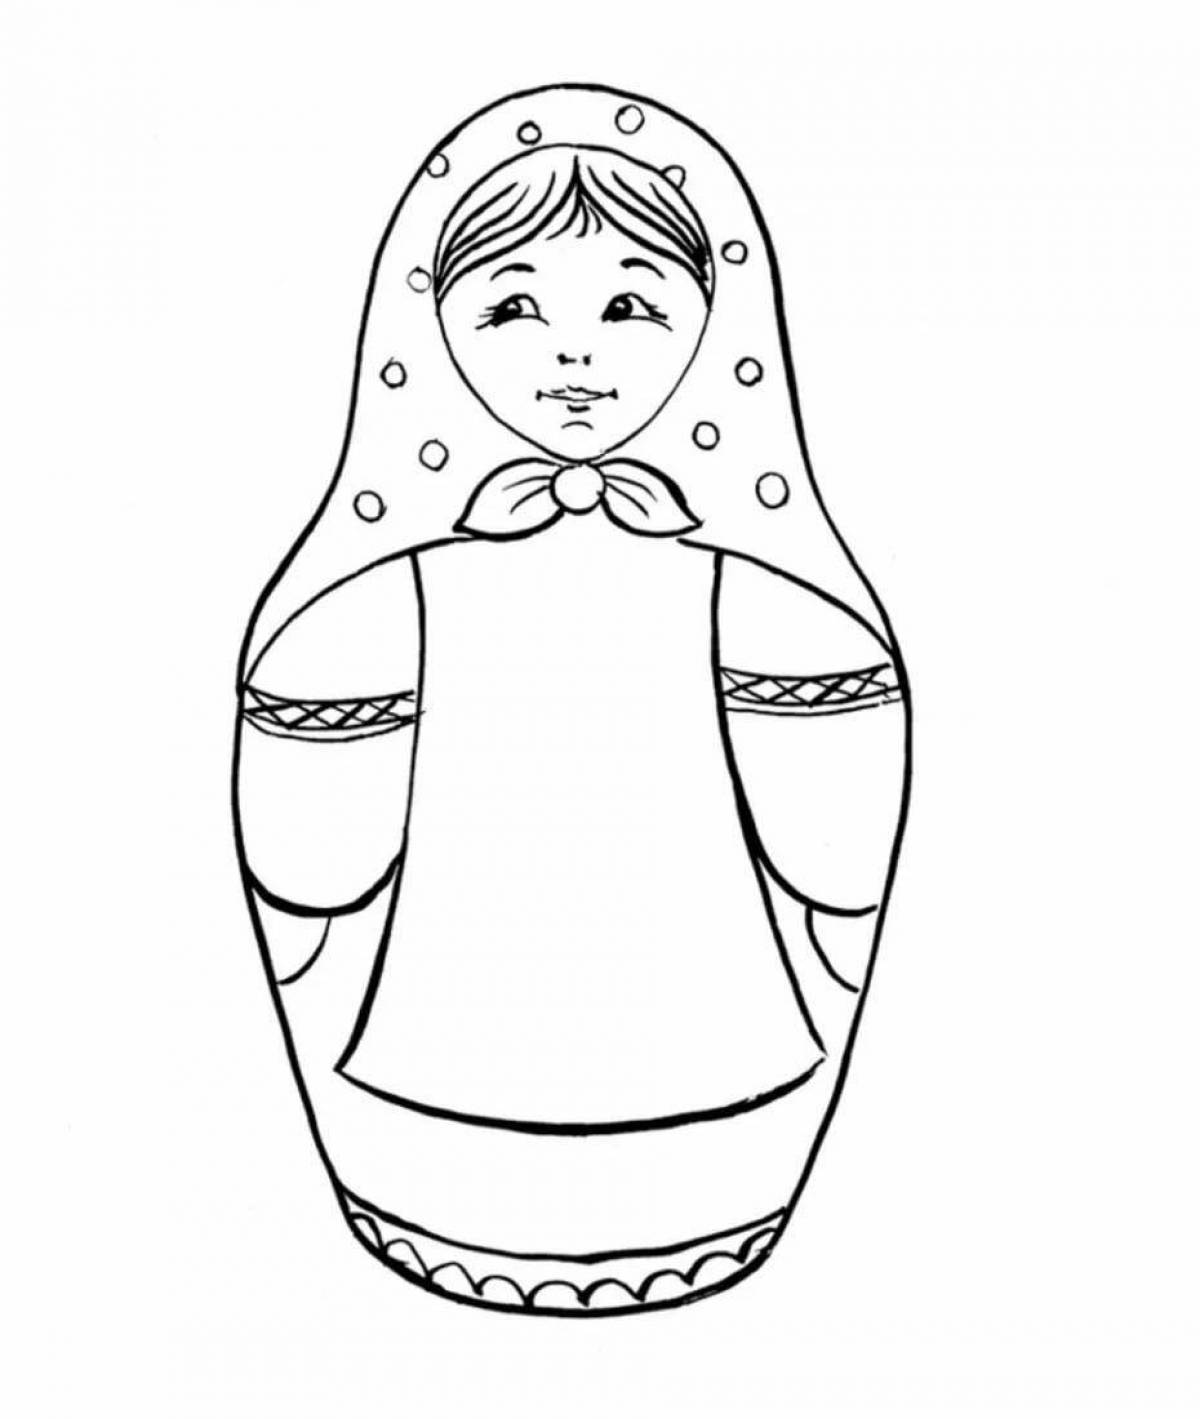 Fairy russian doll coloring book